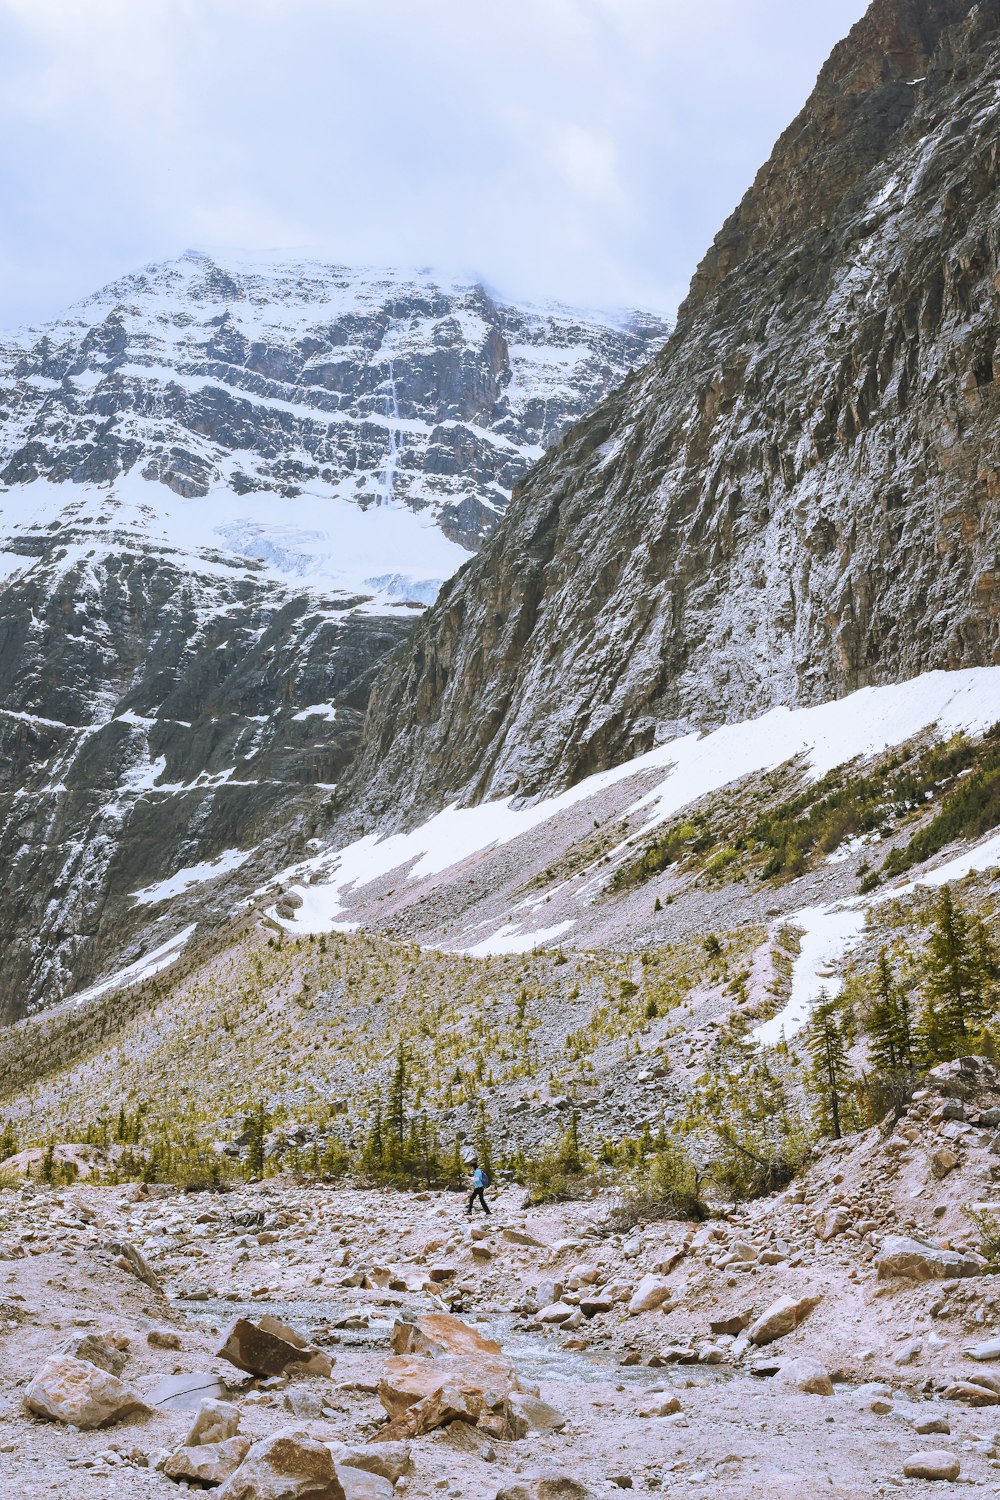 a person walking on a rocky mountain